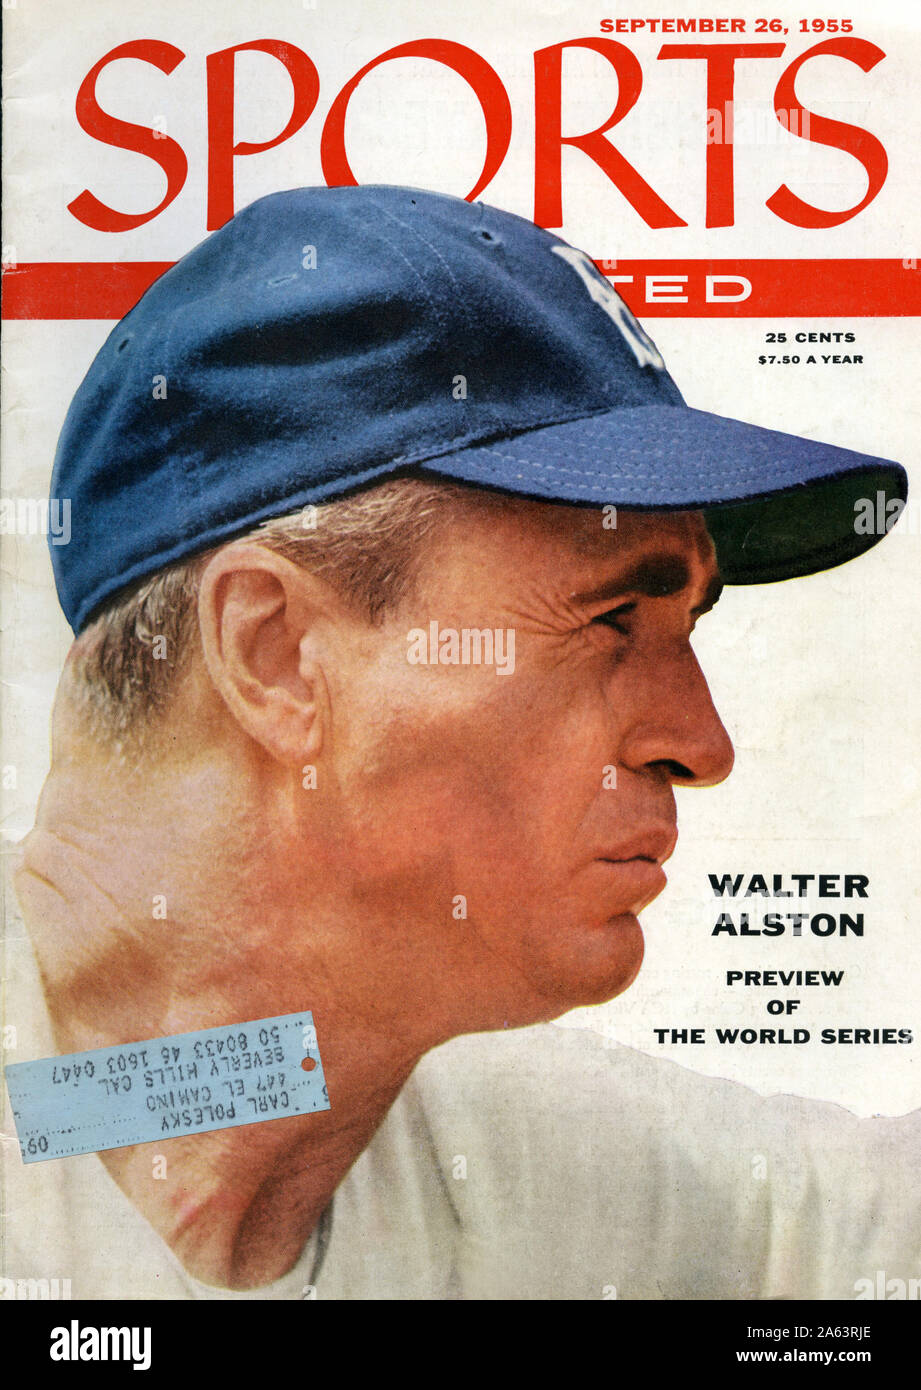 September 22 1958 Football Issue SPORTS ILLUSTRATED 